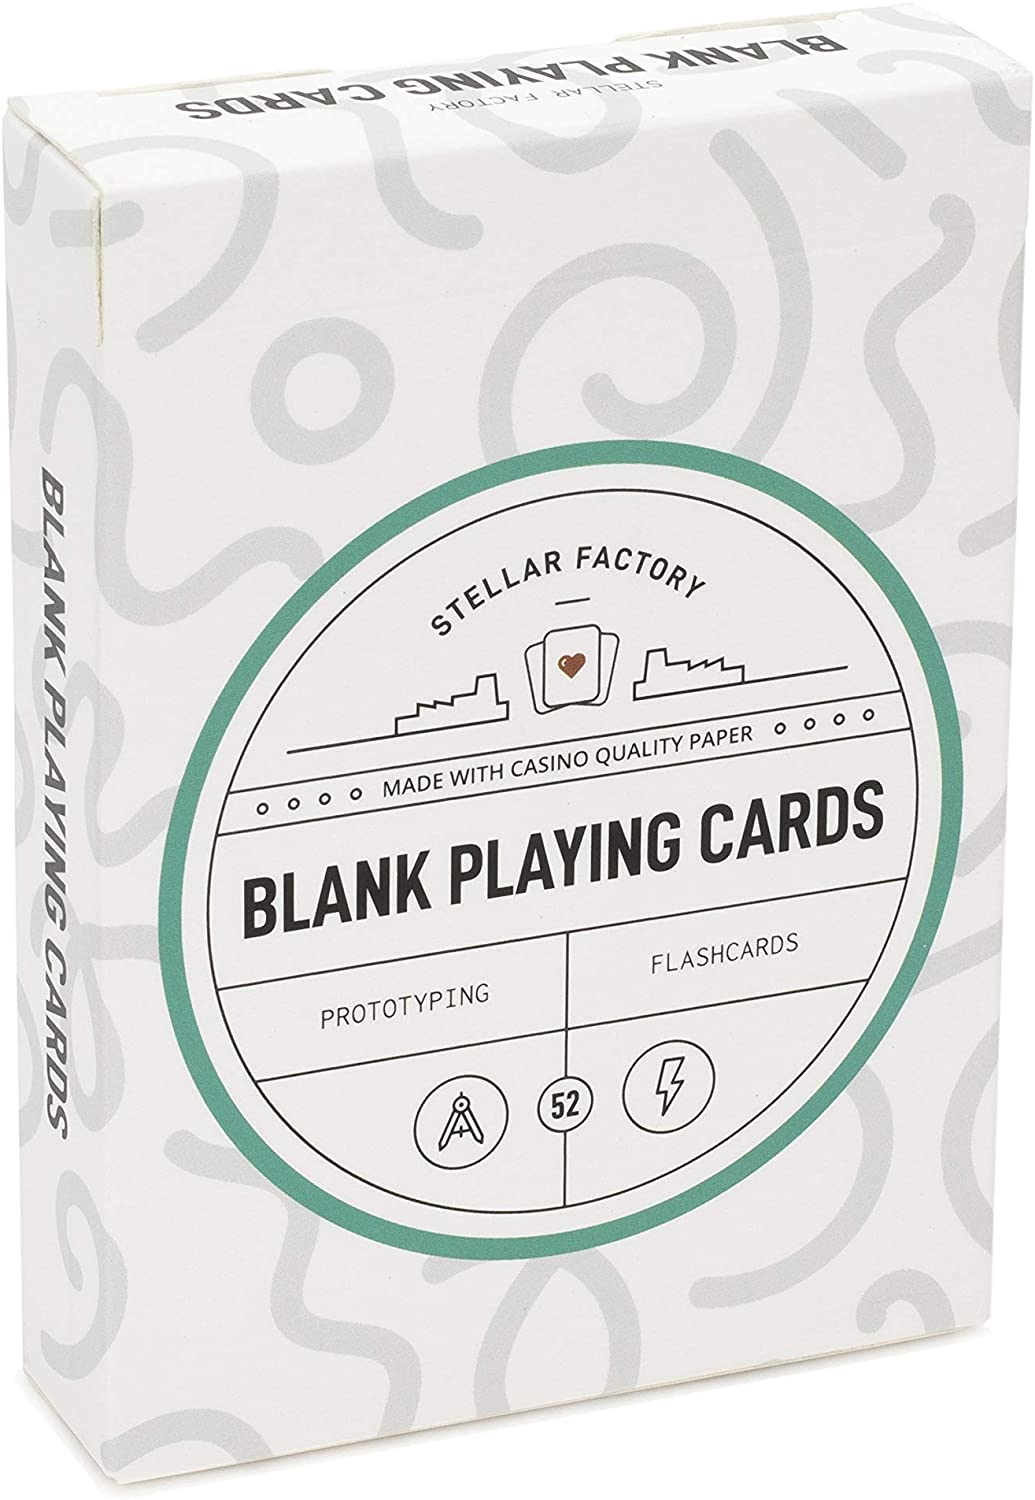 Blank Playing Cards, Create Playing Cards Online